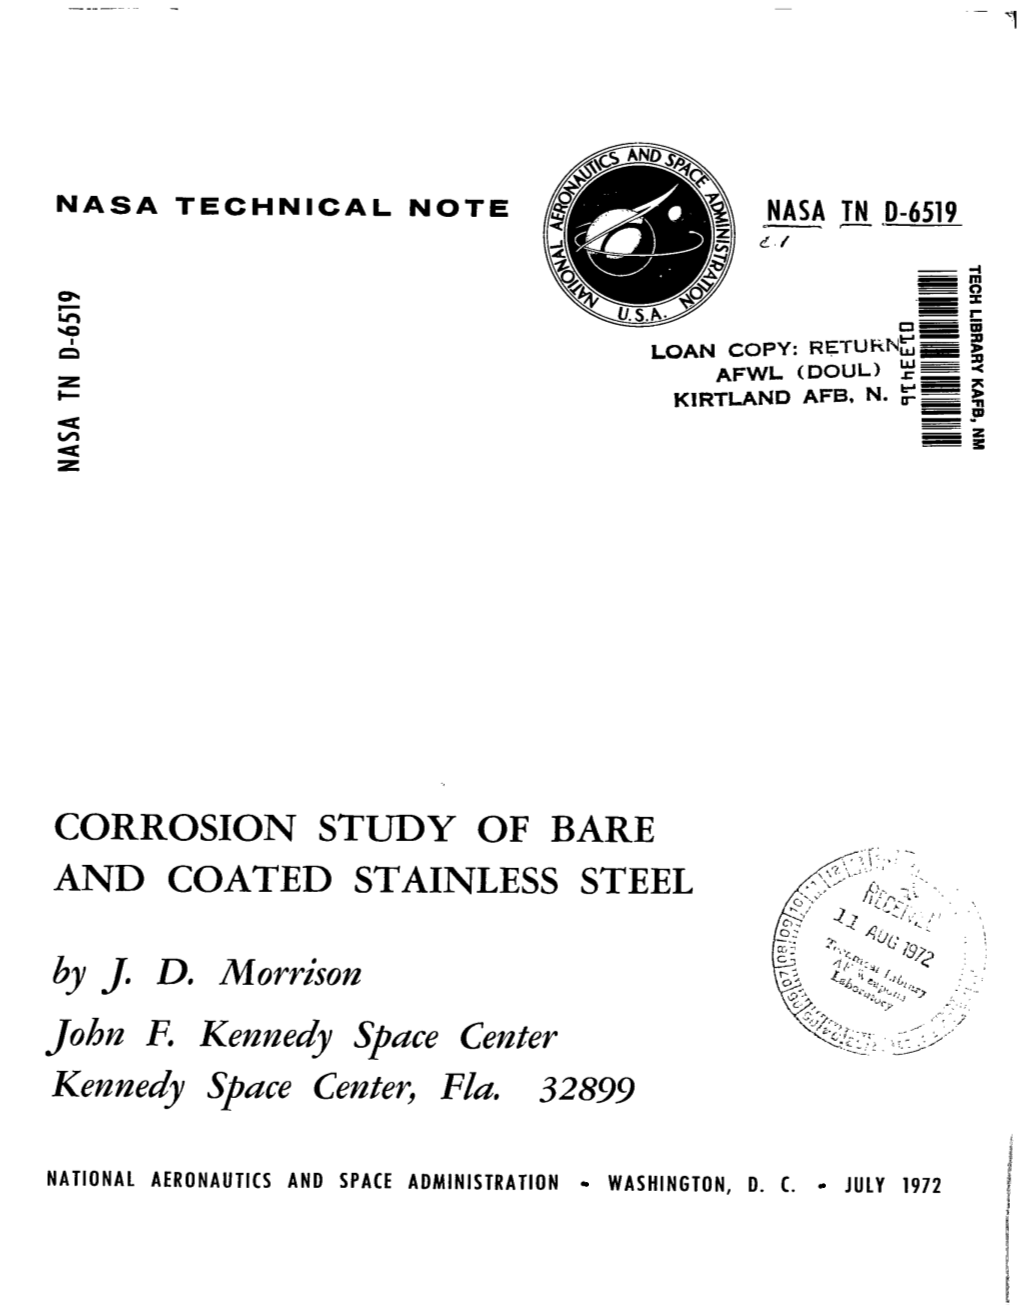 Corrosion Study of Bare and Coated Stainless Steel